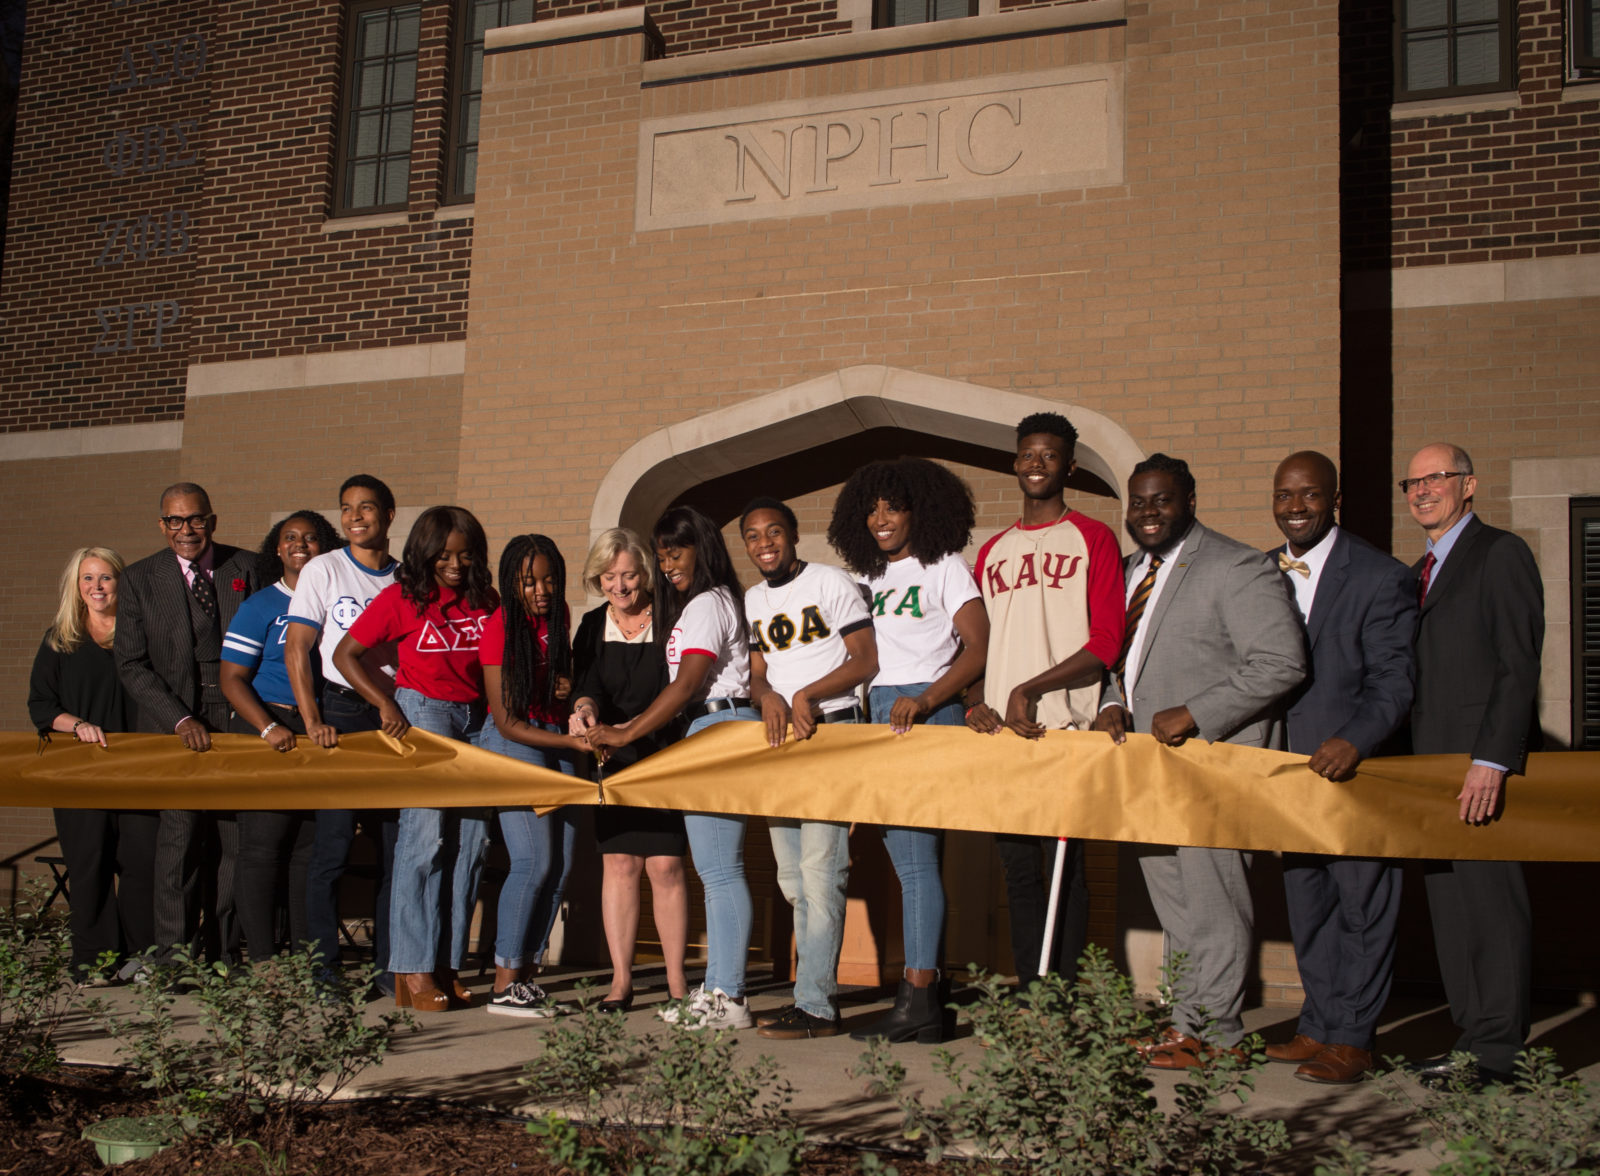 The new National Pan-Hellenic Council House house ribbon-cutting at Vanderbilt University on Oct. 18, 2019. (Price Chambers for Vanderbilt University)